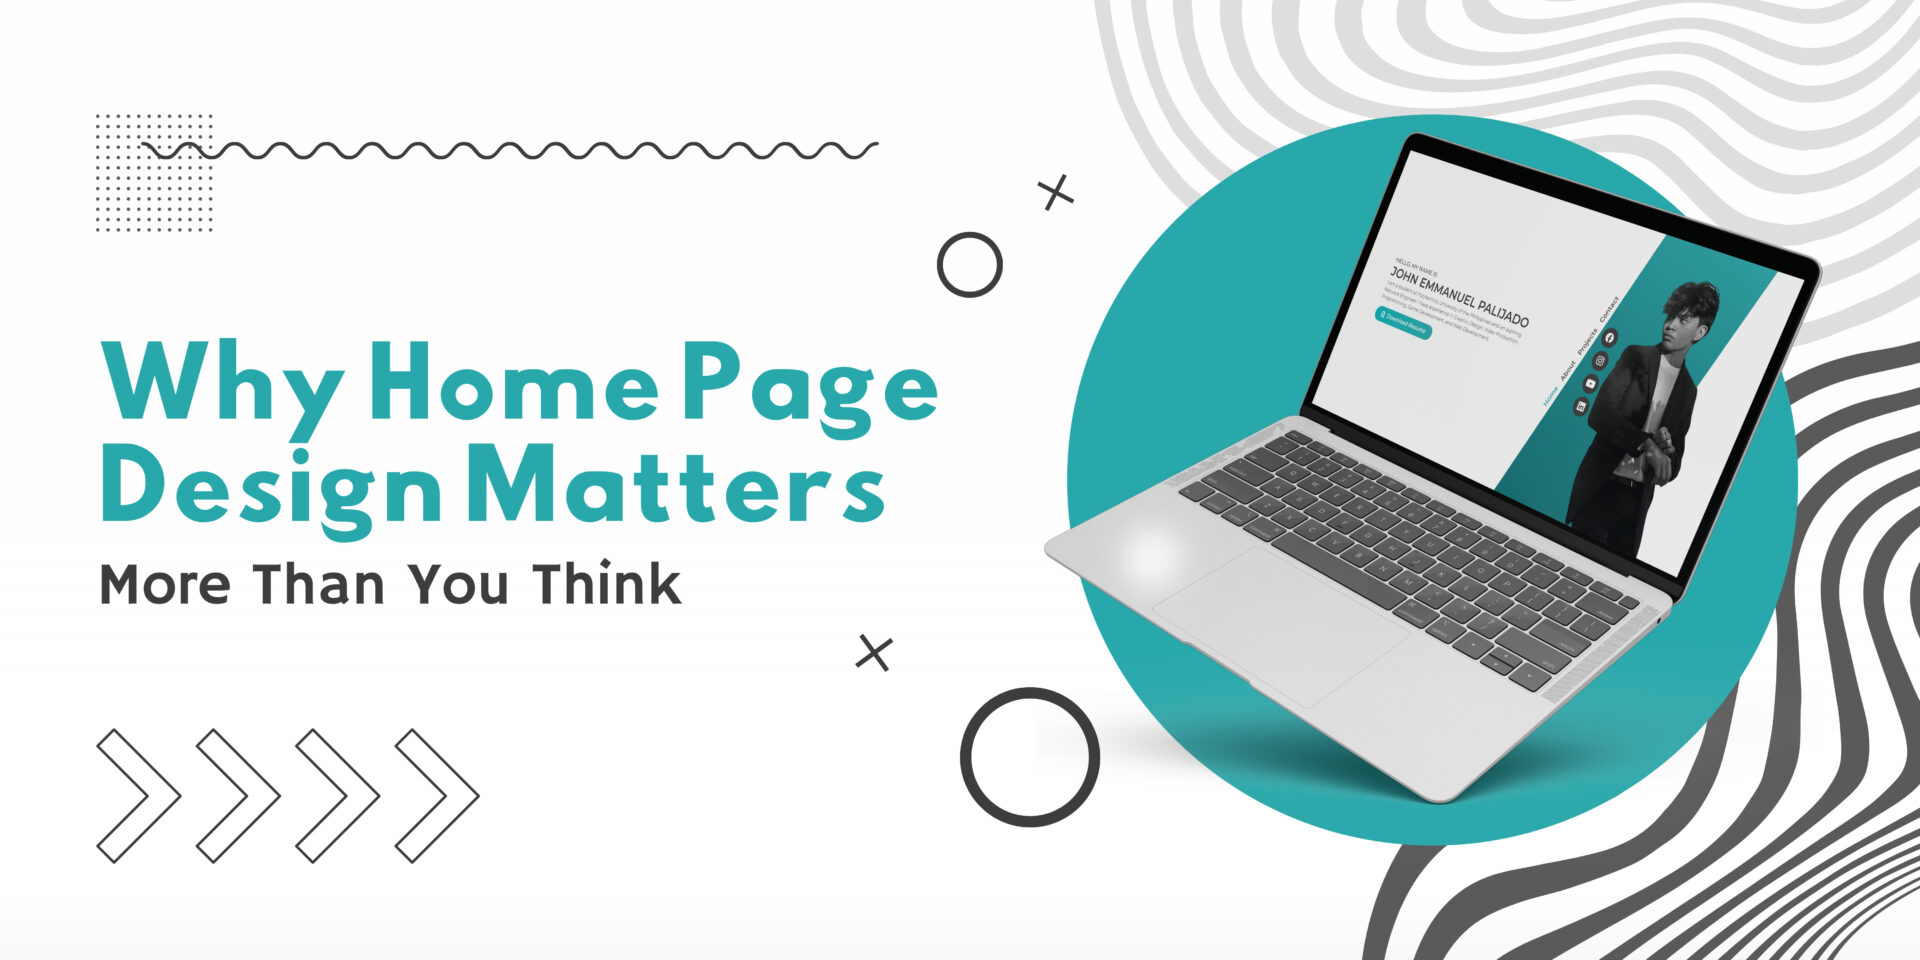 Featured image for “Why Home Page Design Matters More Than You Think”